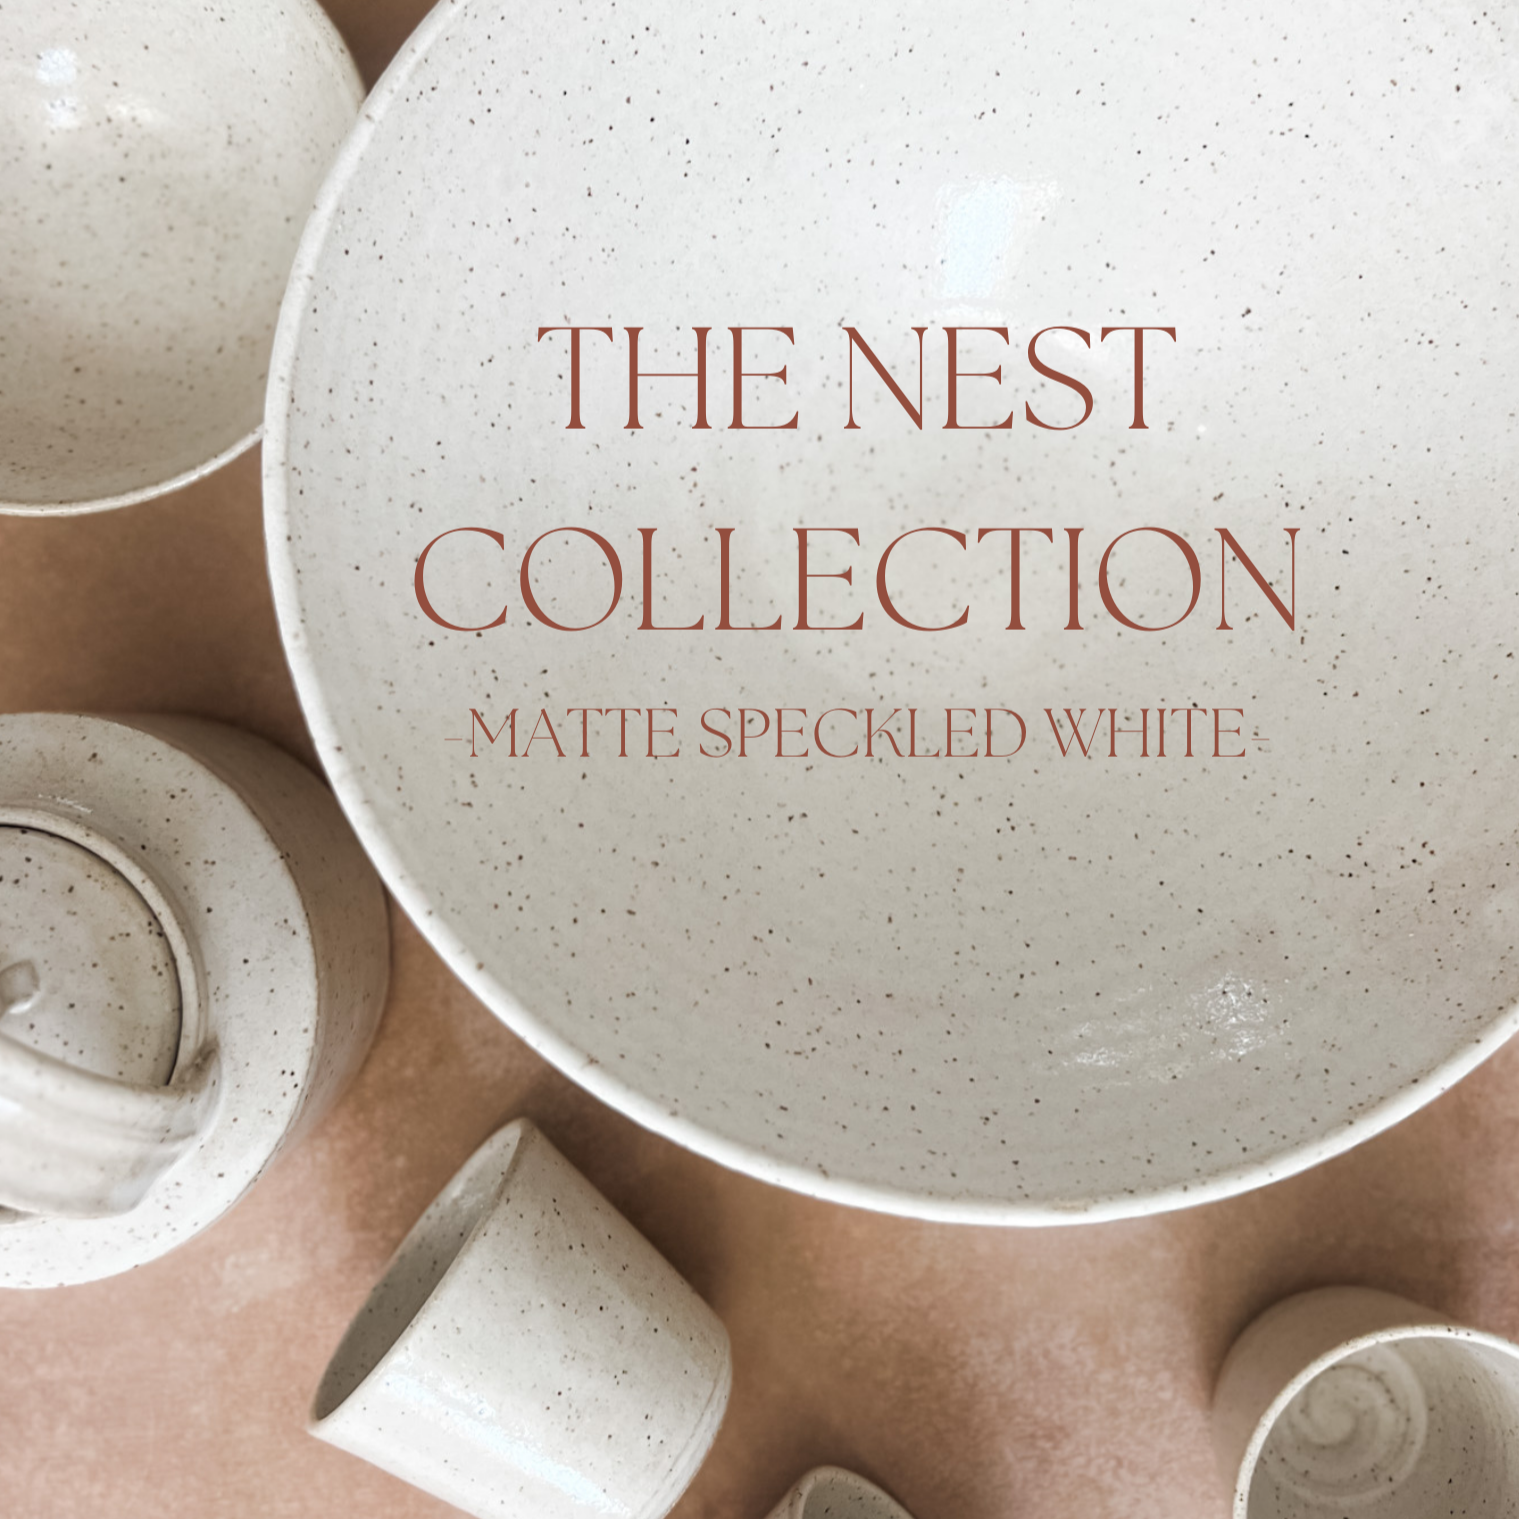 Los Padres Ceremony Cup - The Nest Collection